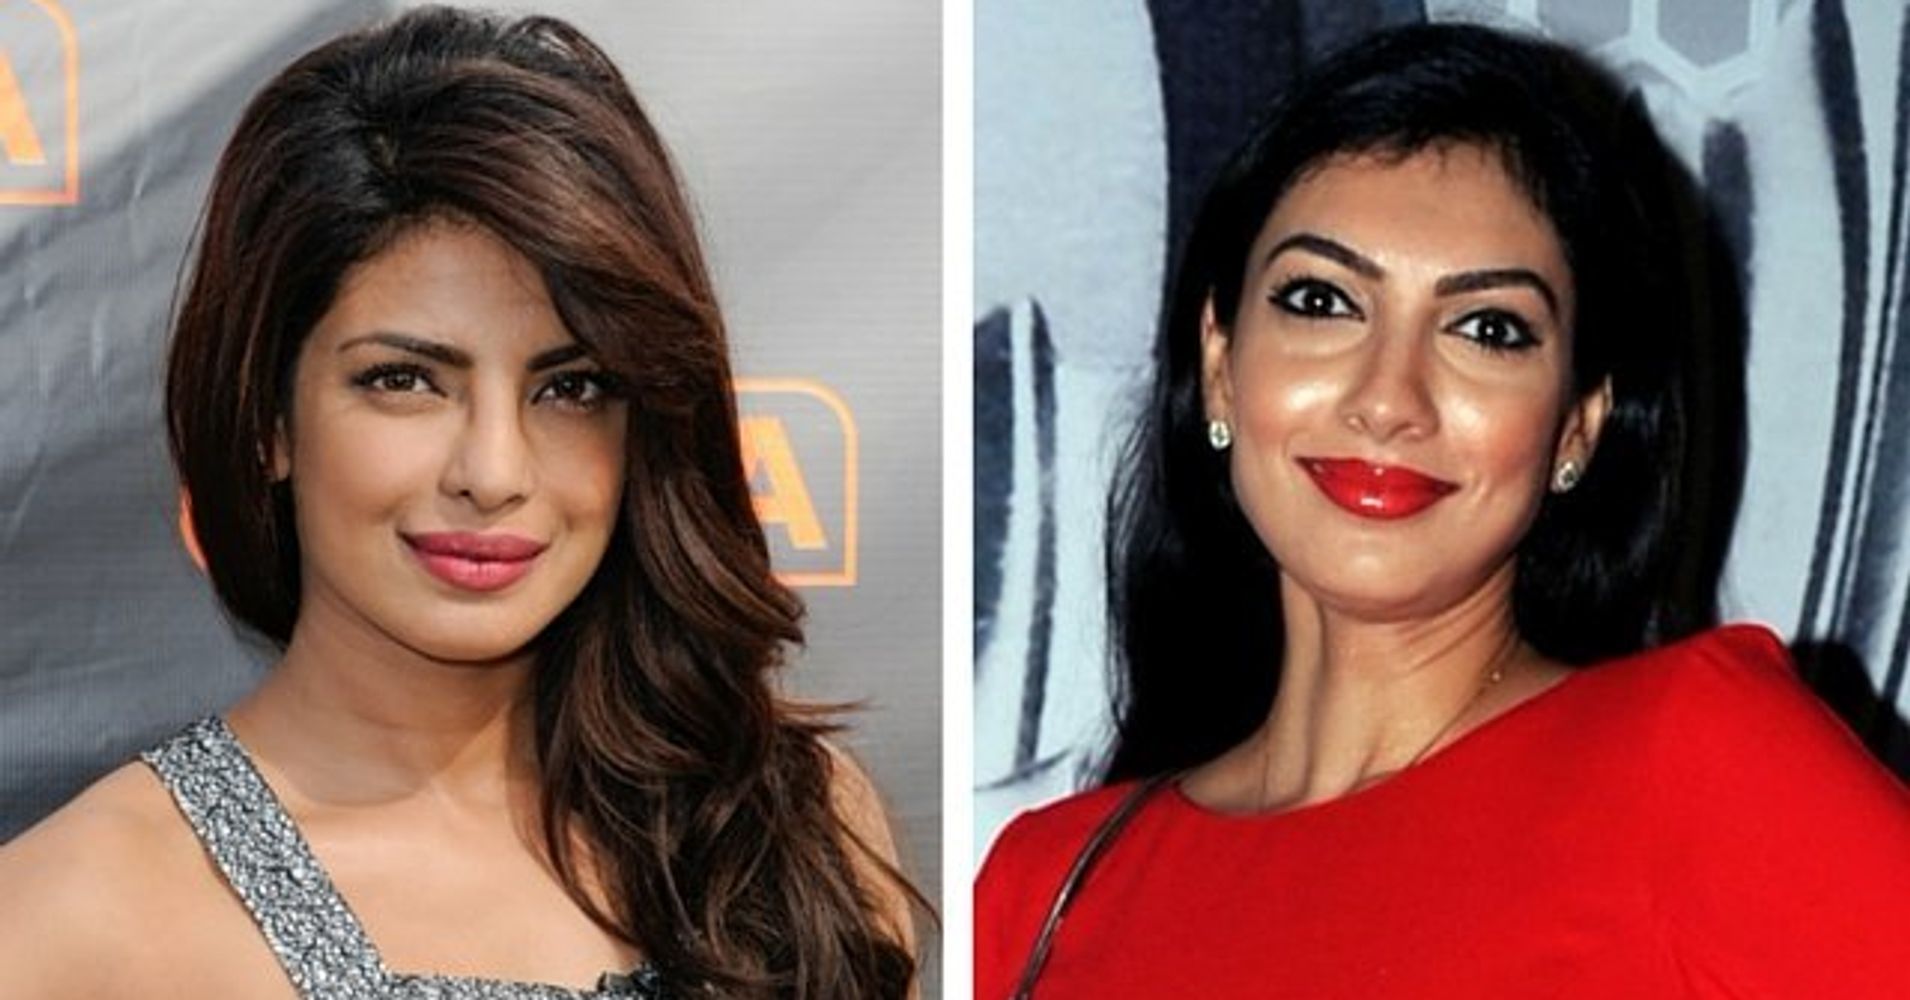 Abc Promoted Priyanka Chopra With Photos Of The Wrong Indian Actress Huffpost 